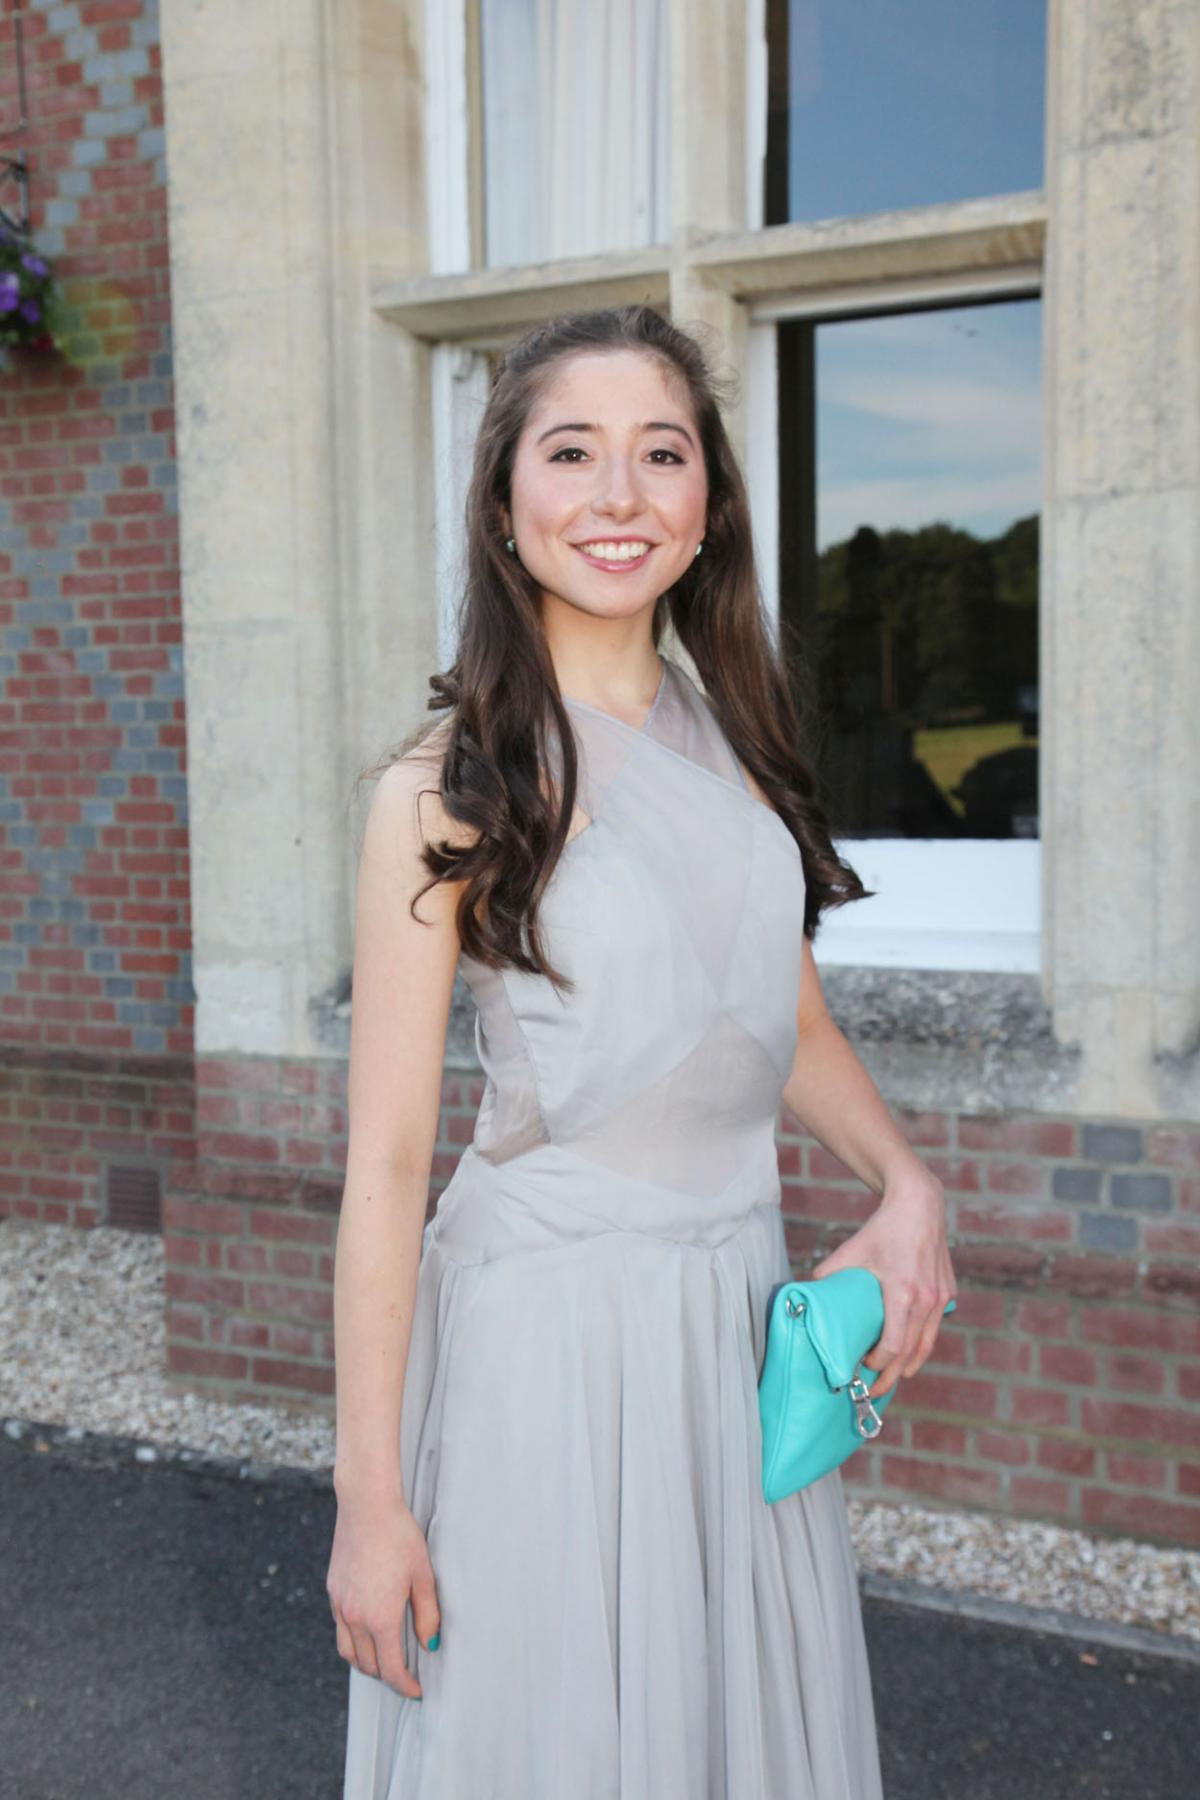 Talbot Heath Year 11 School Prom at Burley Manor on 25th June 2015. Pictures by Nick Free. 